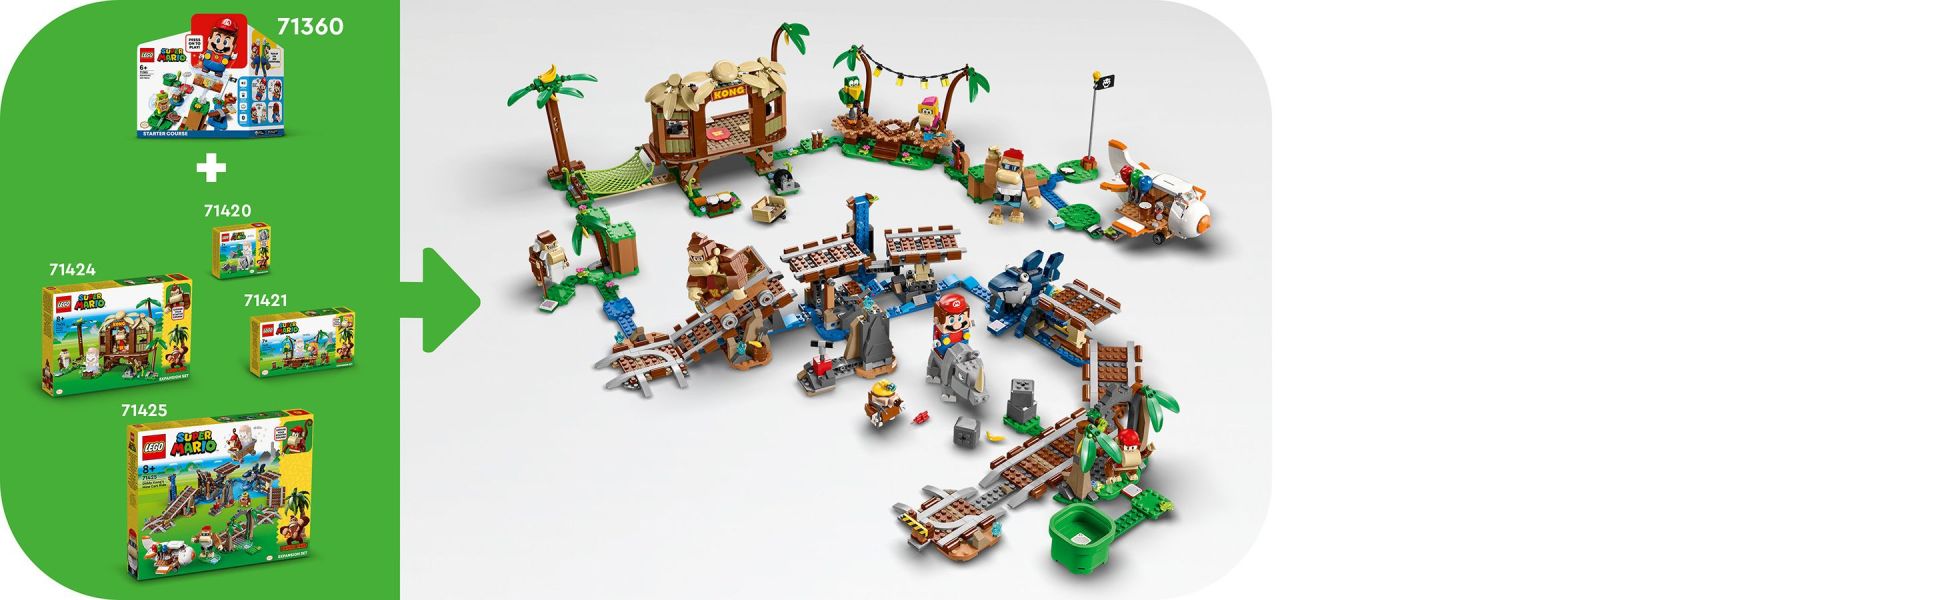 Lego Super Mario Donkey Kong's Tree House Expansion Set Buildable Game  71424 : Target